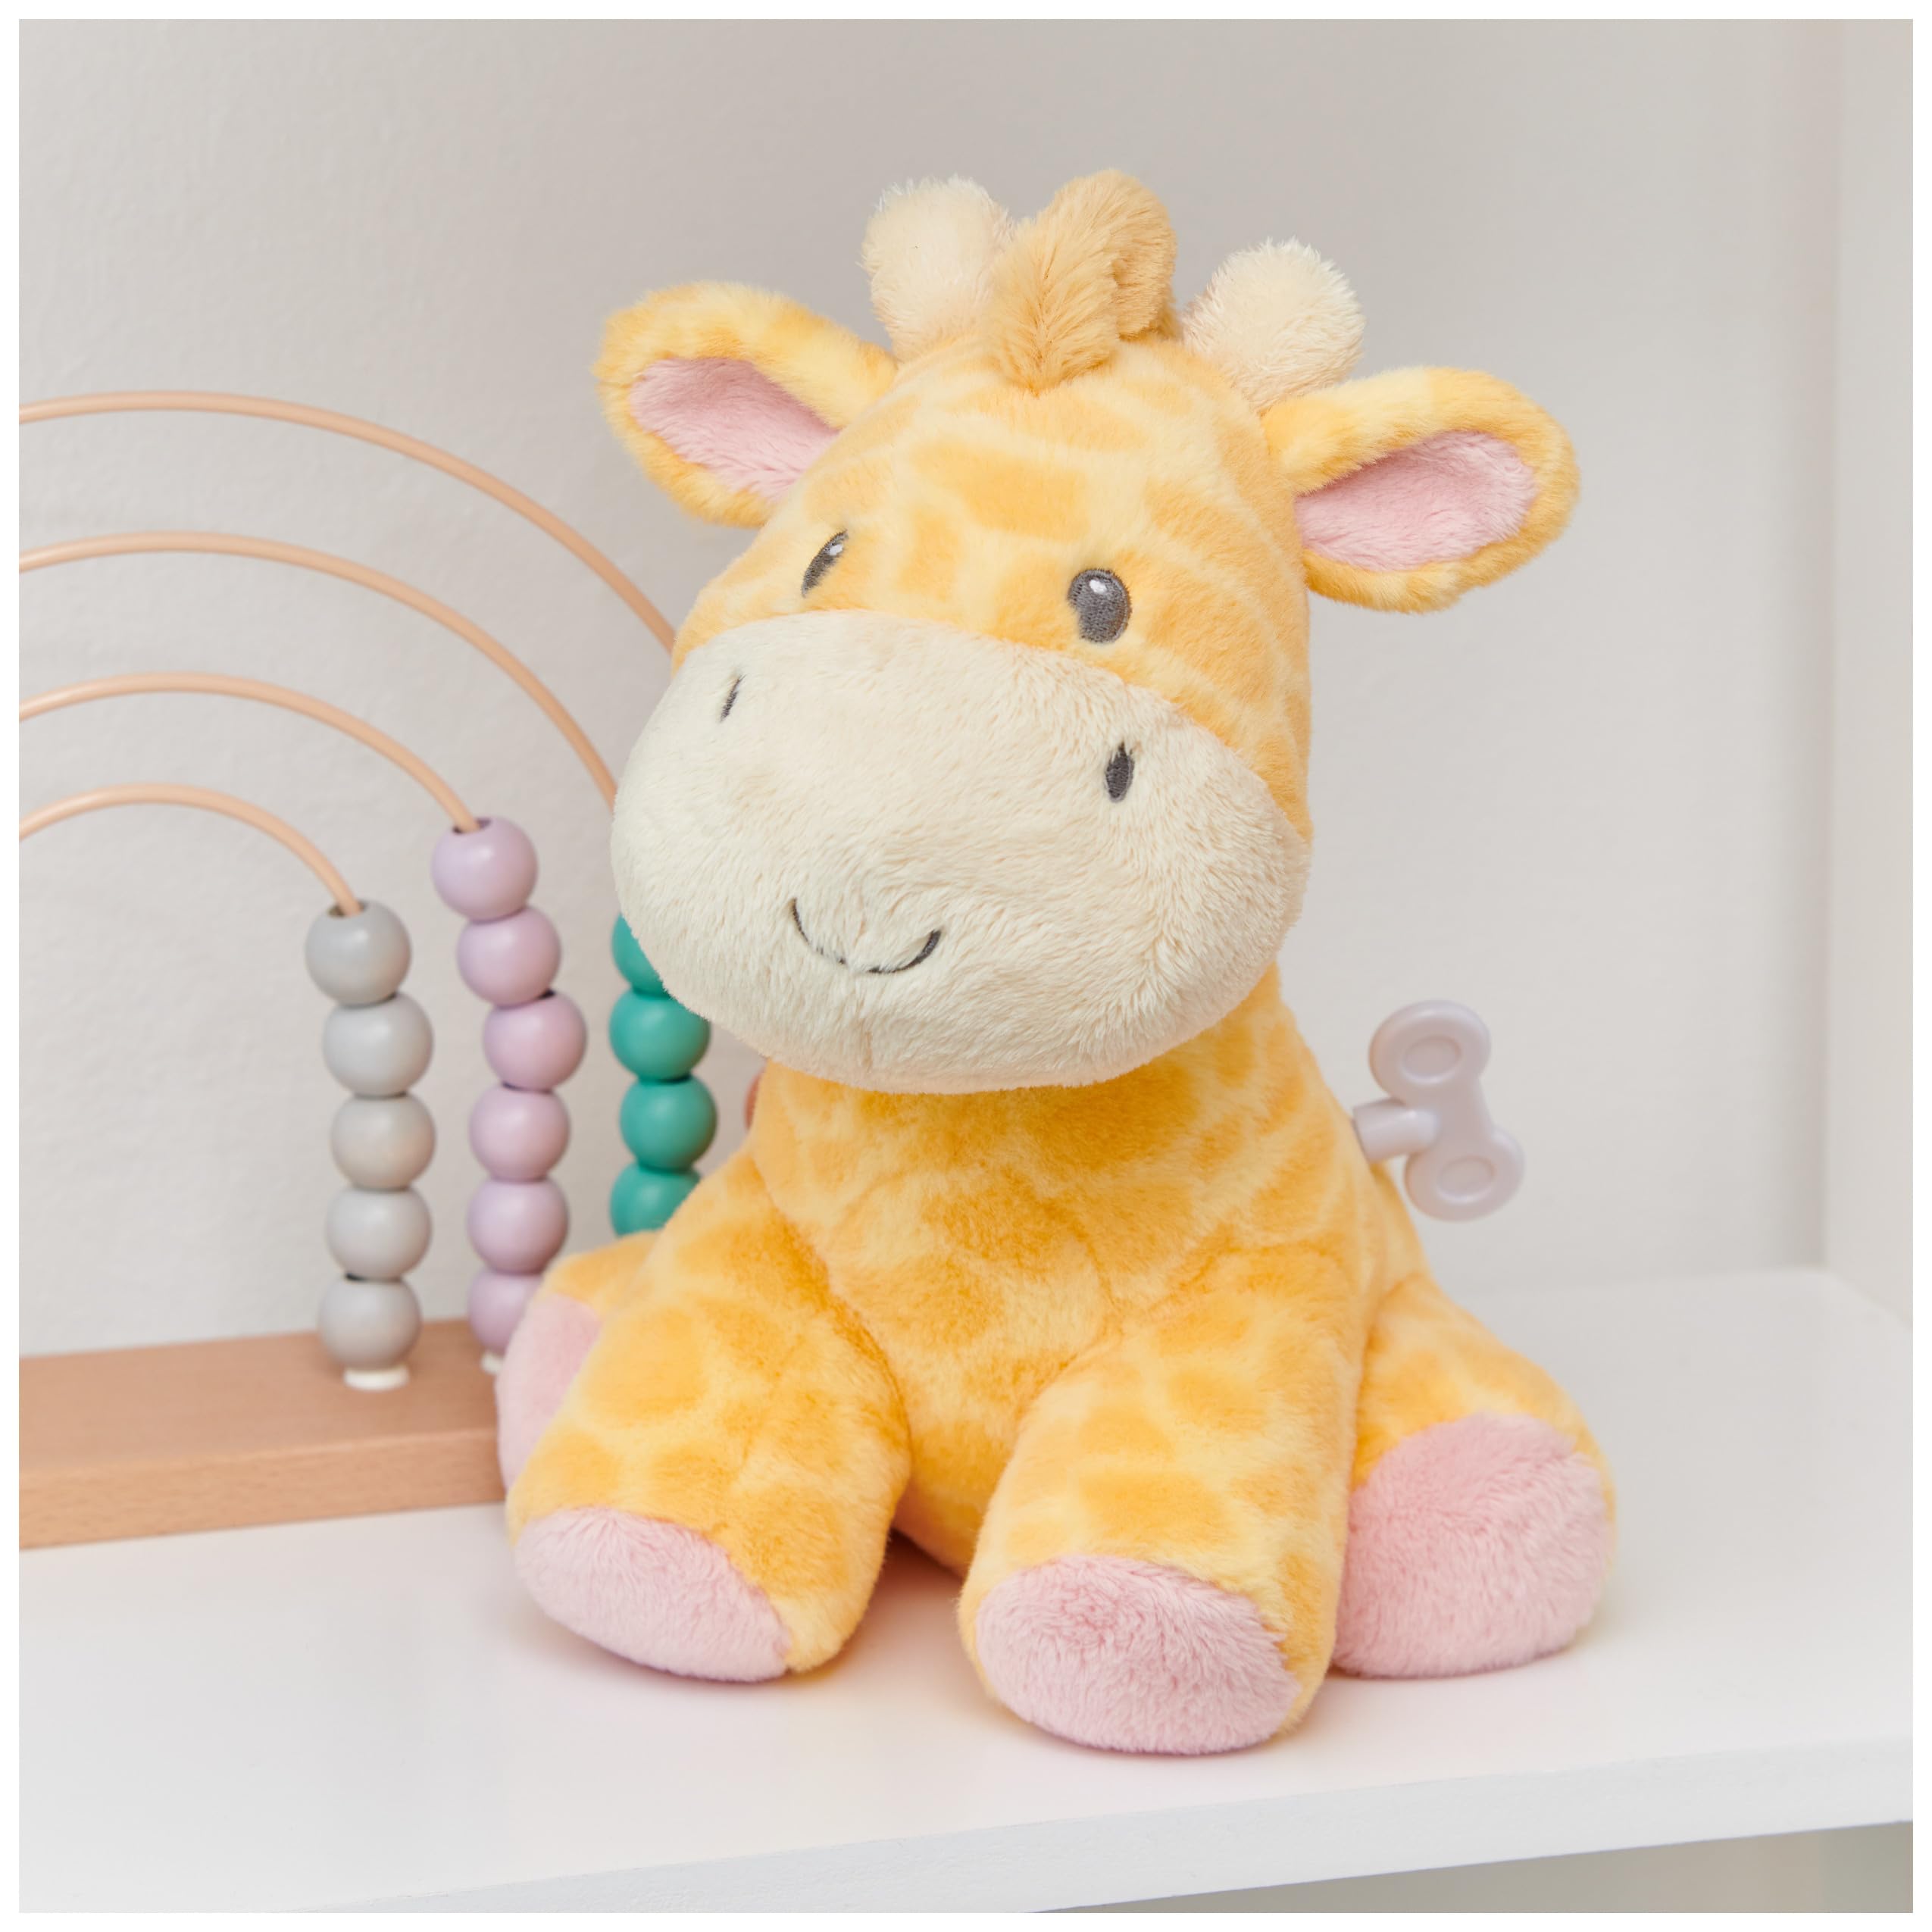 GUND Baby Safari Friends Giraffe Keywind Musical Plush, Plays Brahms’ Lullaby, Stuffed Animal Sensory Toy for Ages 10 Months and Up, Yellow, 9”